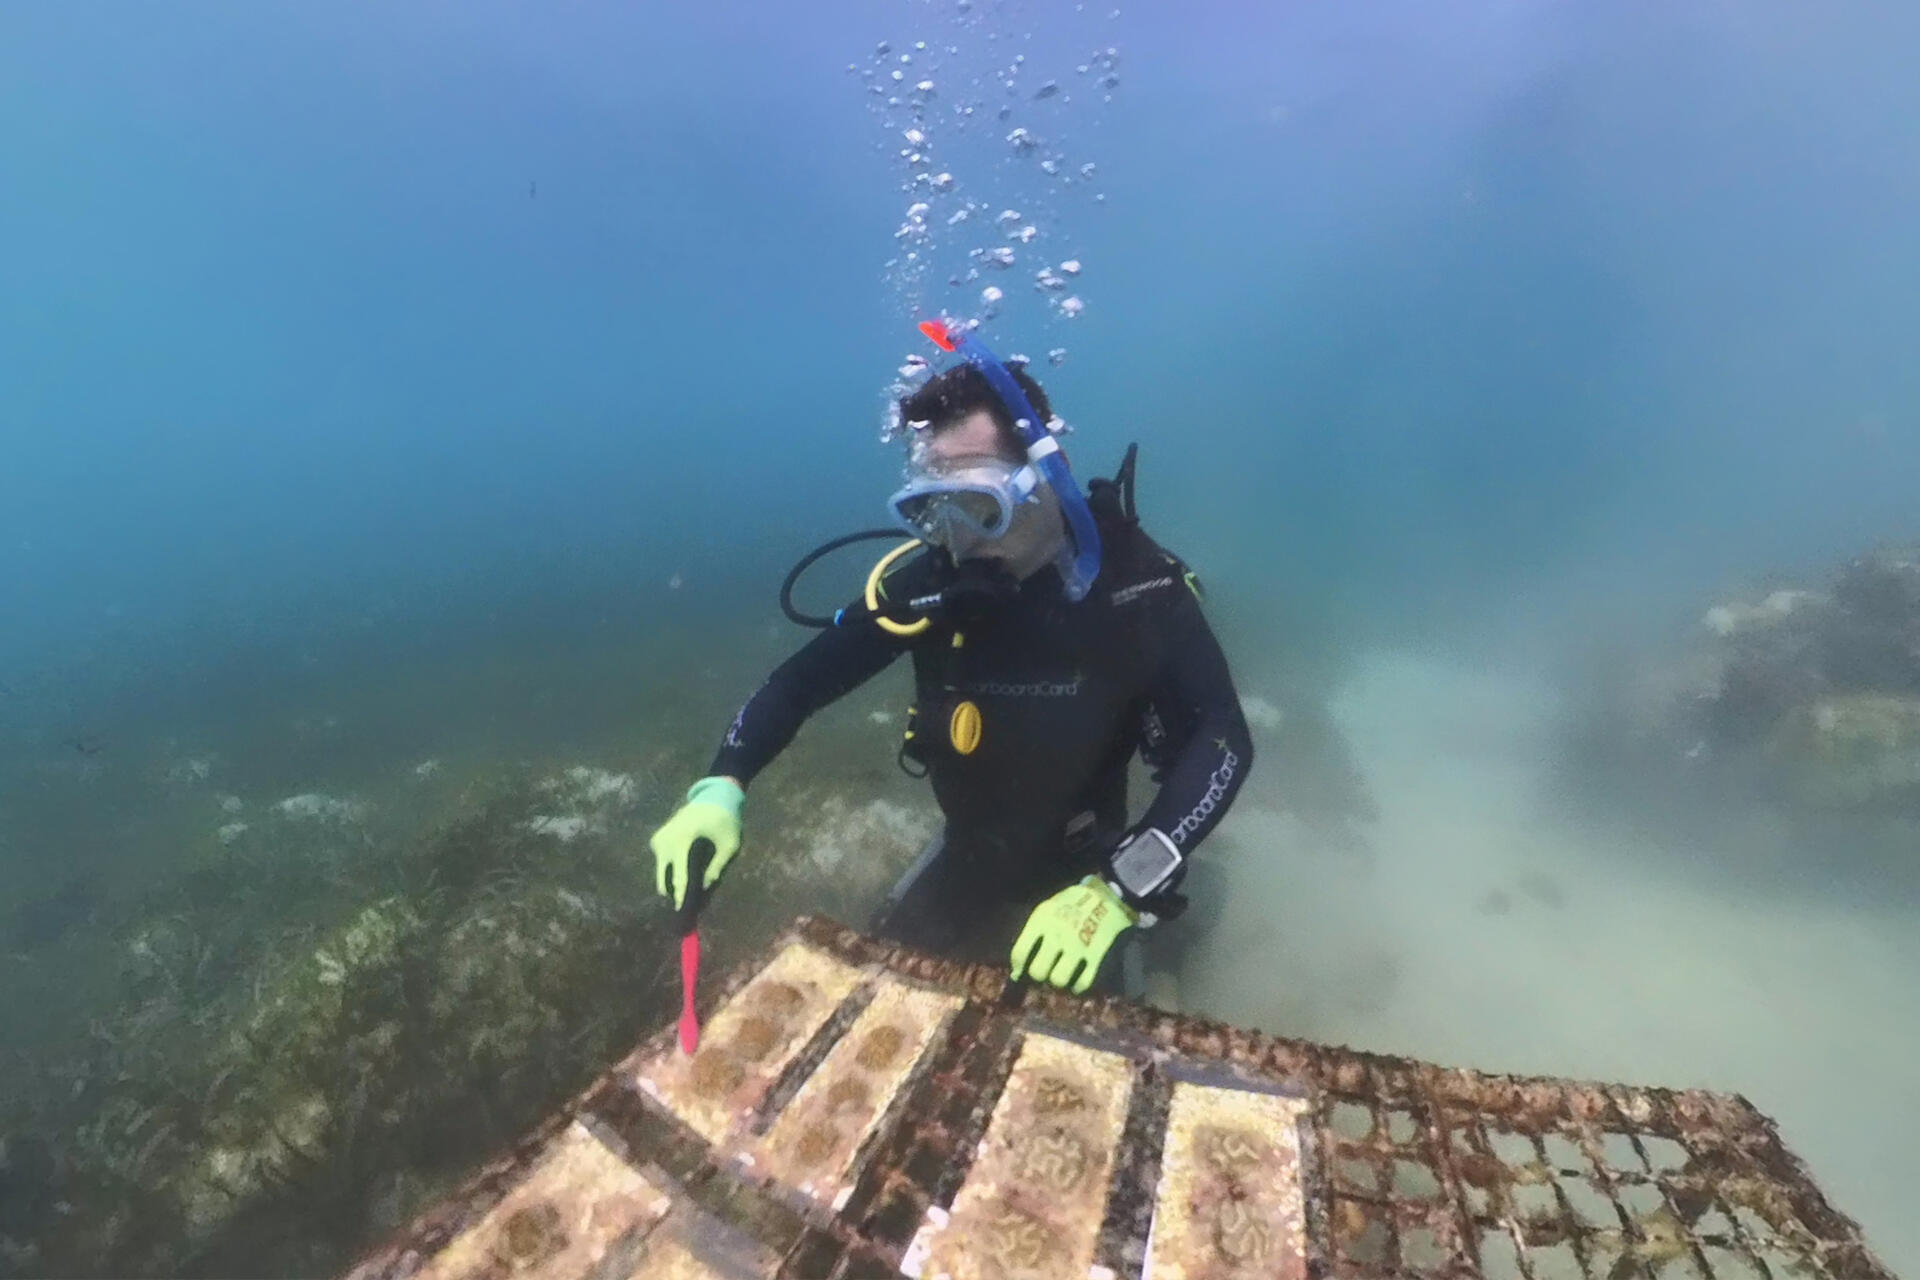 Jon Slator, Chief Product Officer at Starboard Card, volunteering at the coral nursery.